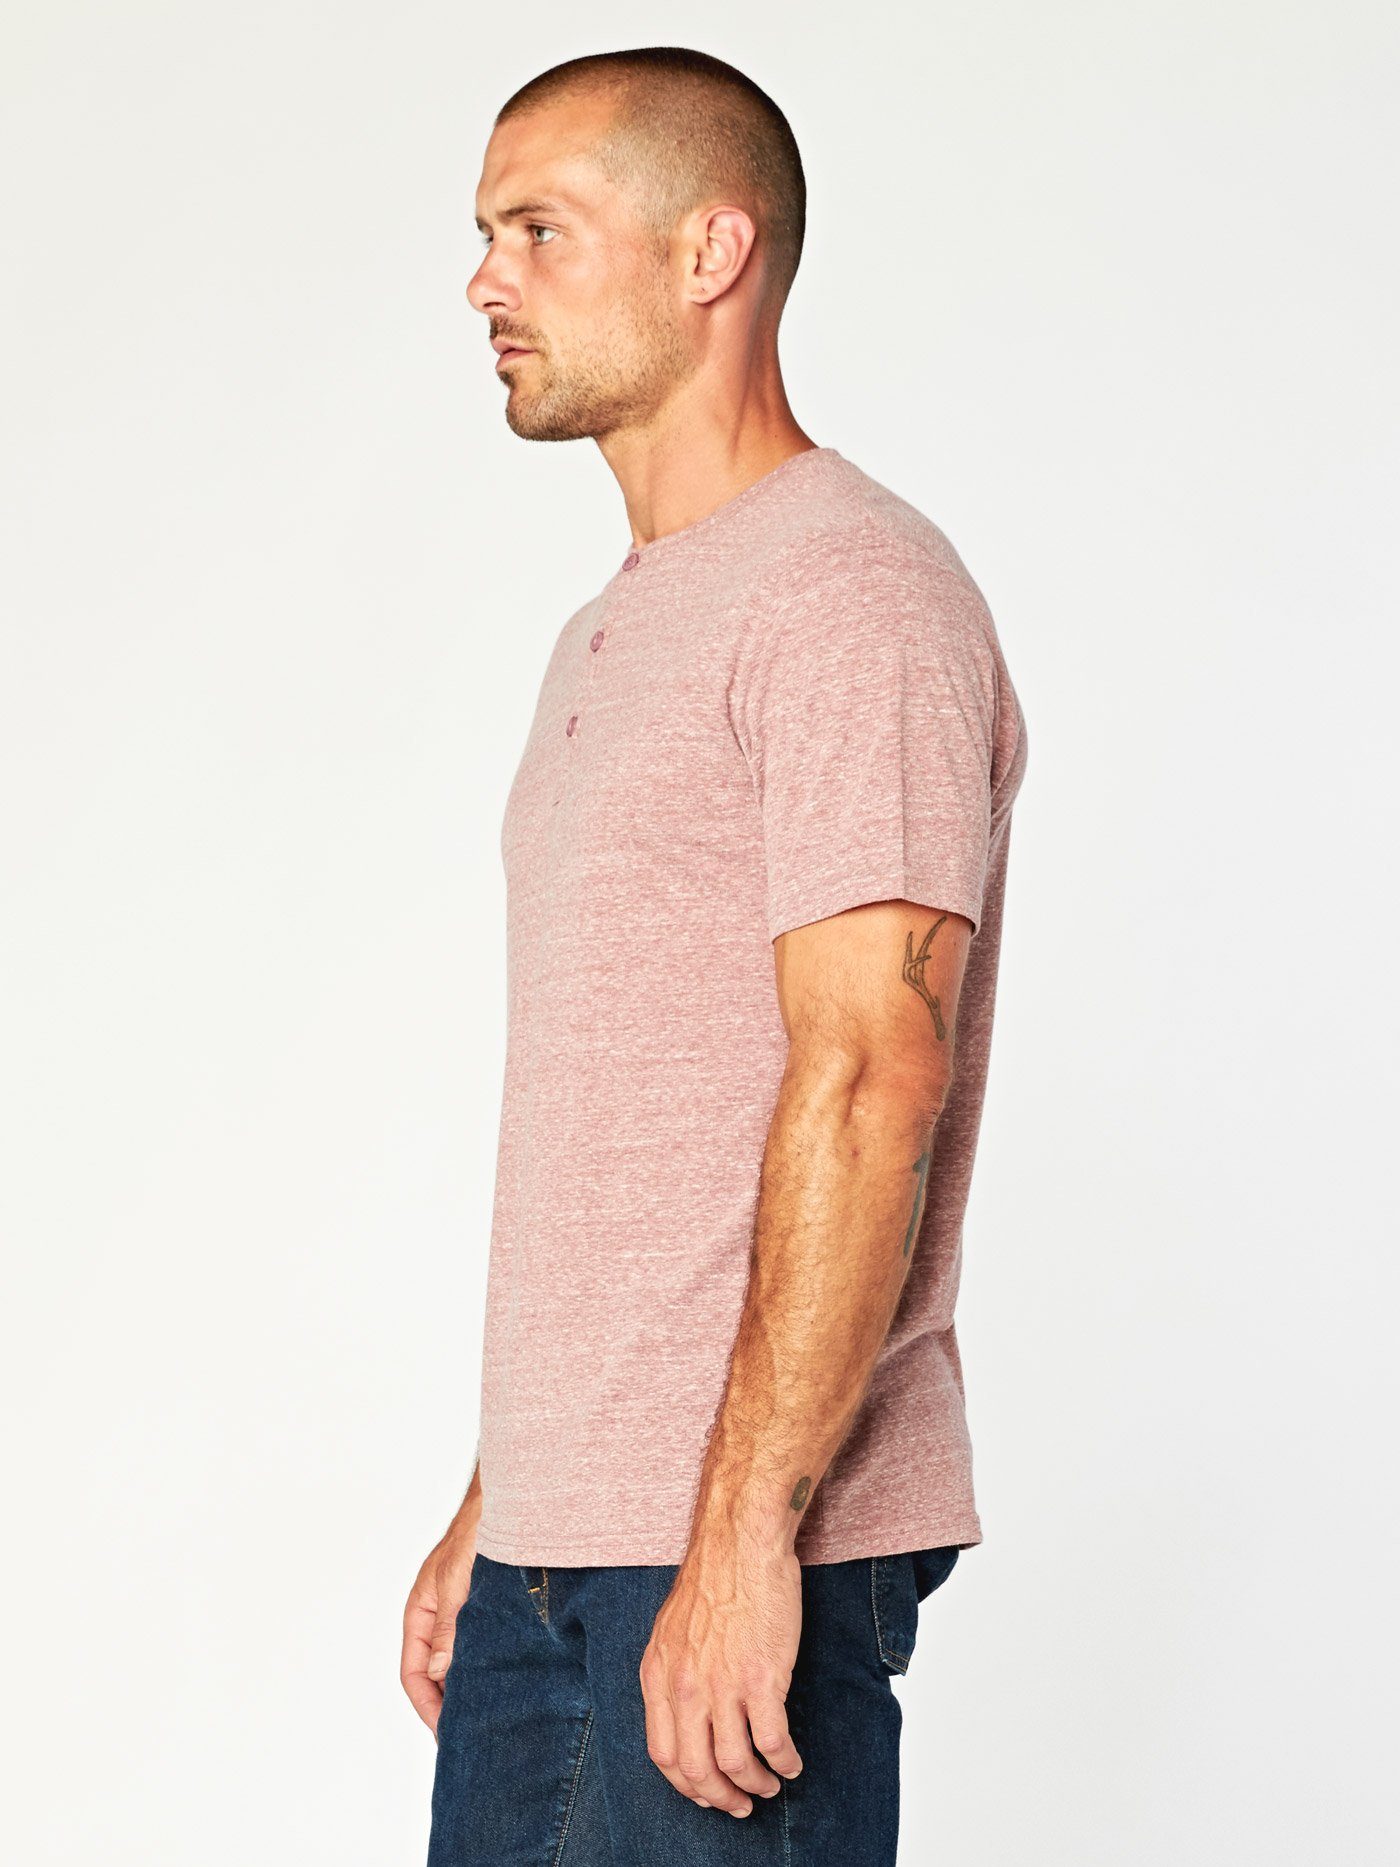 Baseline Triblend Henley Mens Tops Threads 4 Thought